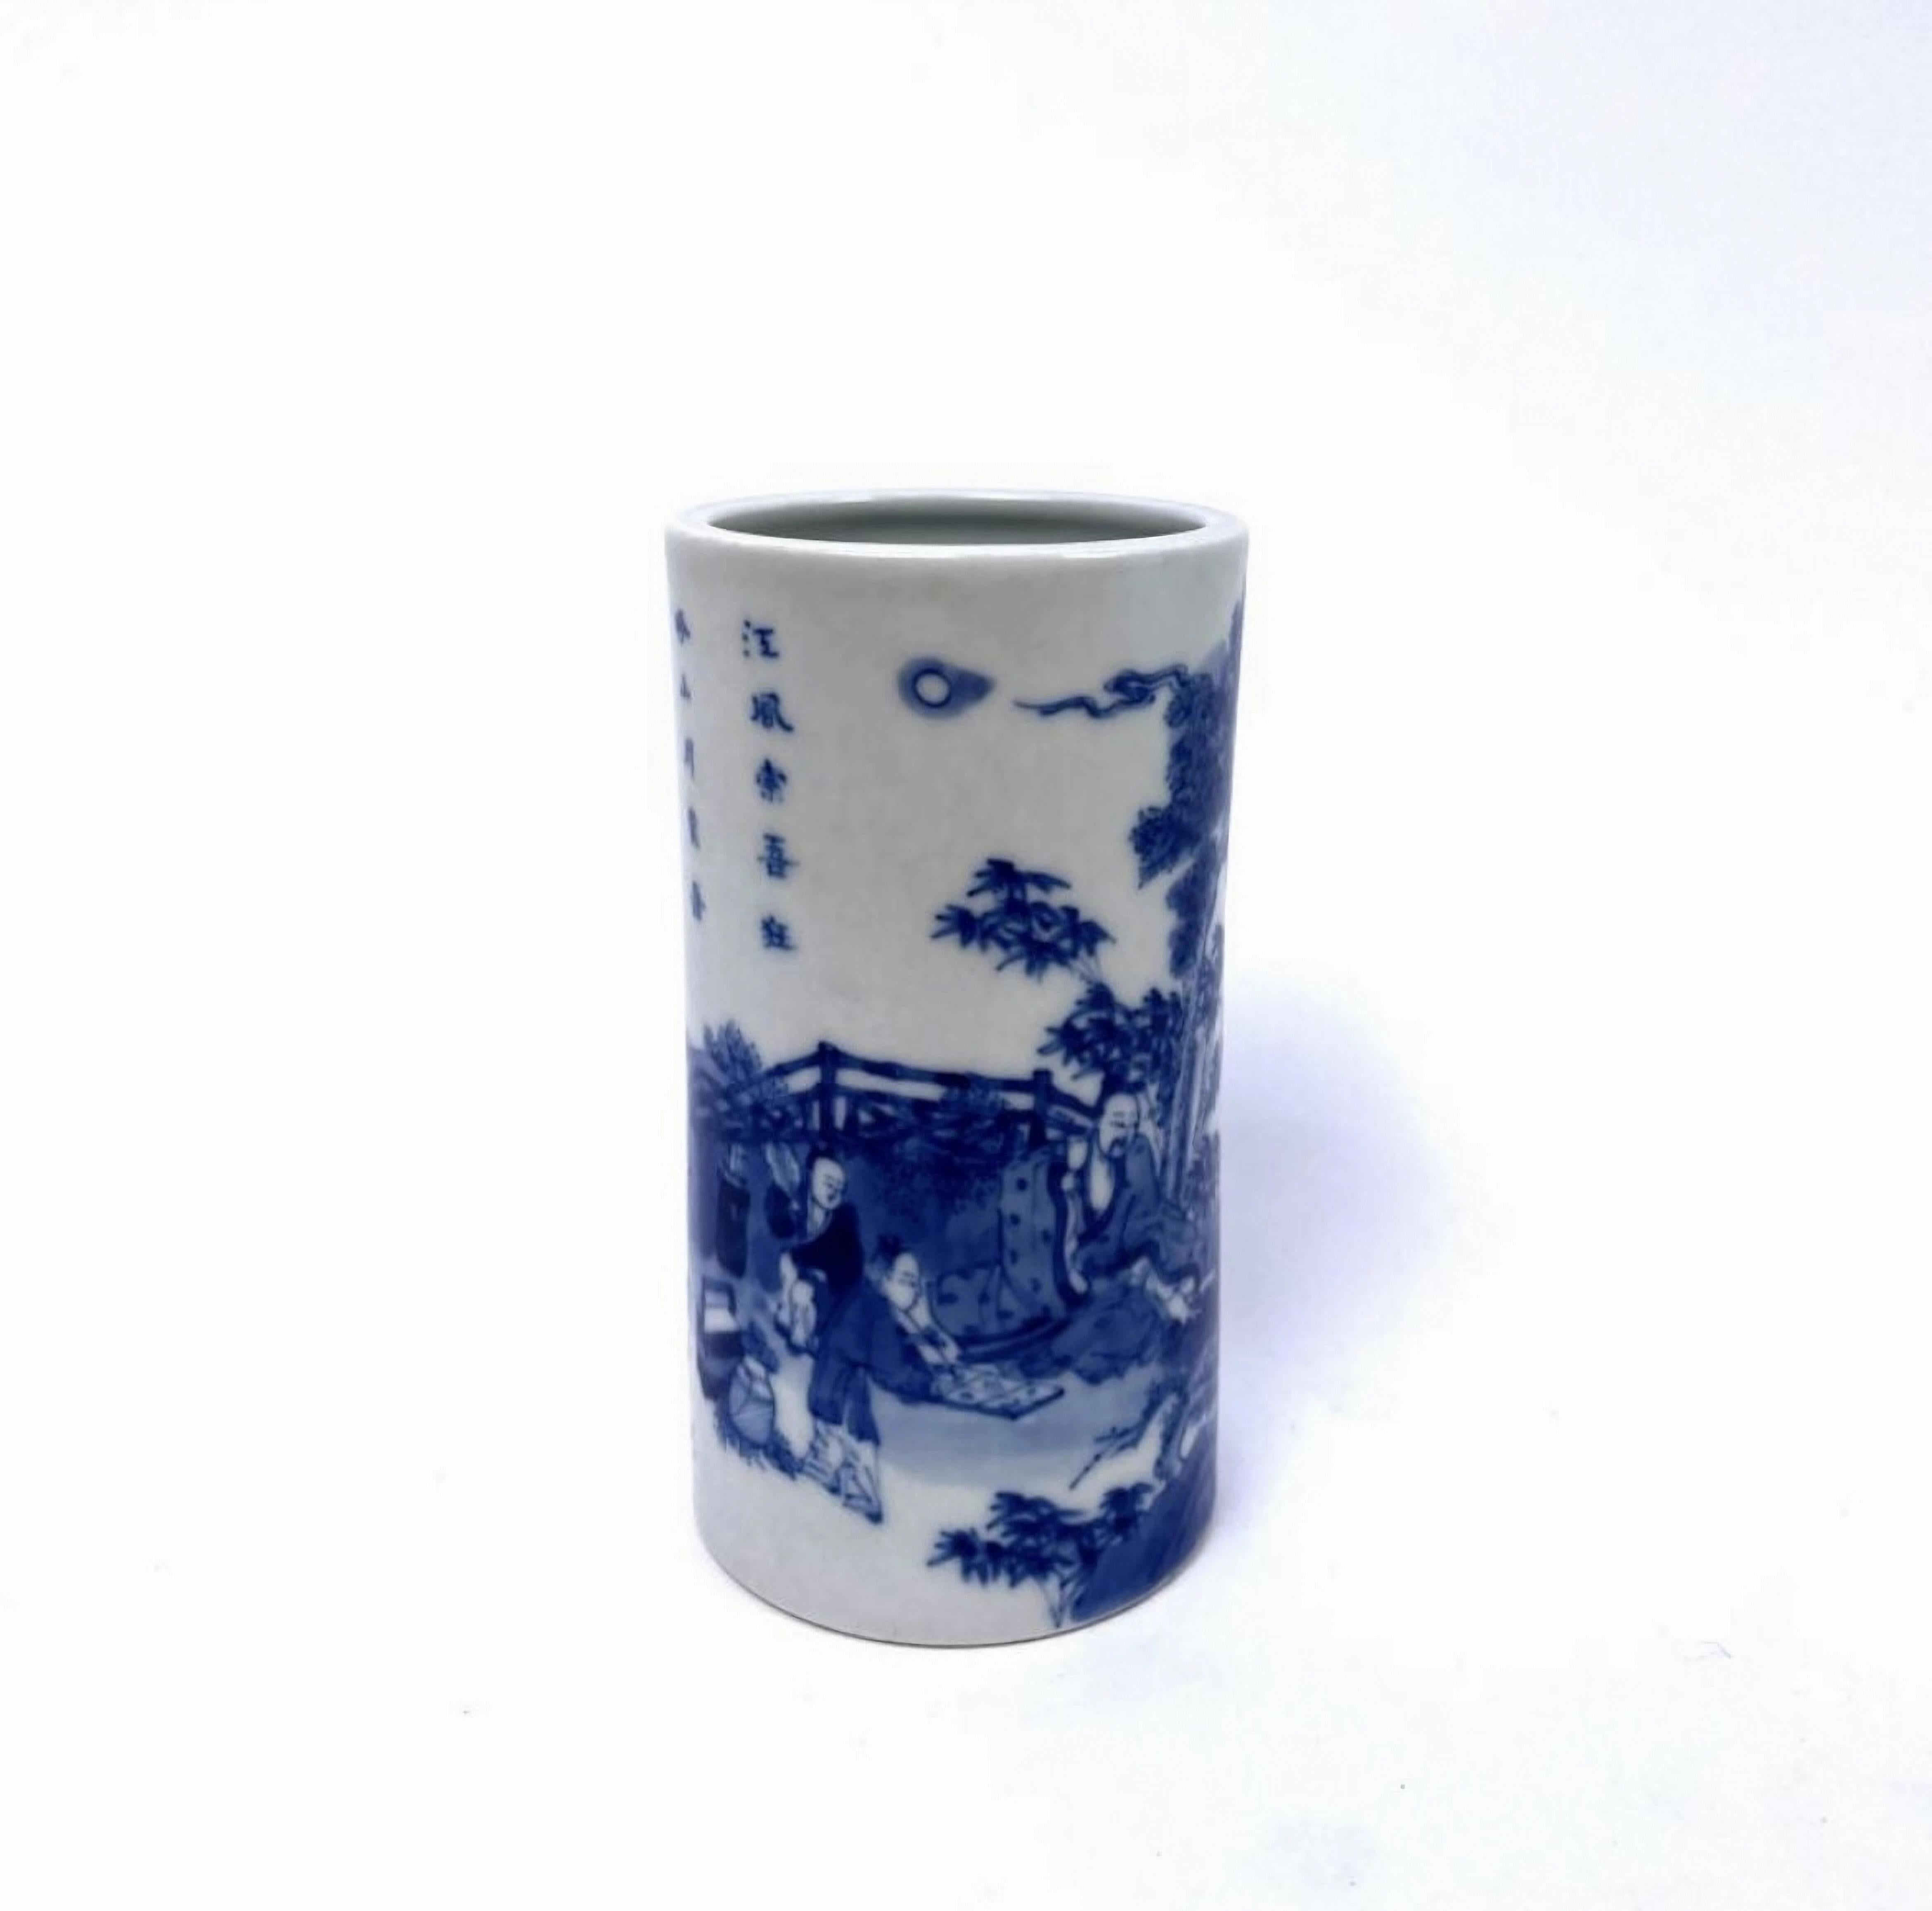 A Chinese Blue & White Brush Pot Depicting Figural & Landscape Scenes, 19th Century

Provenance: The Collection of Dr. John Yu AC

Dimension: Height: 9cm Diameter: 5cm.

Dr. Yu was the Founding Chair of VisAsia in the Art Gallery of New South Wales